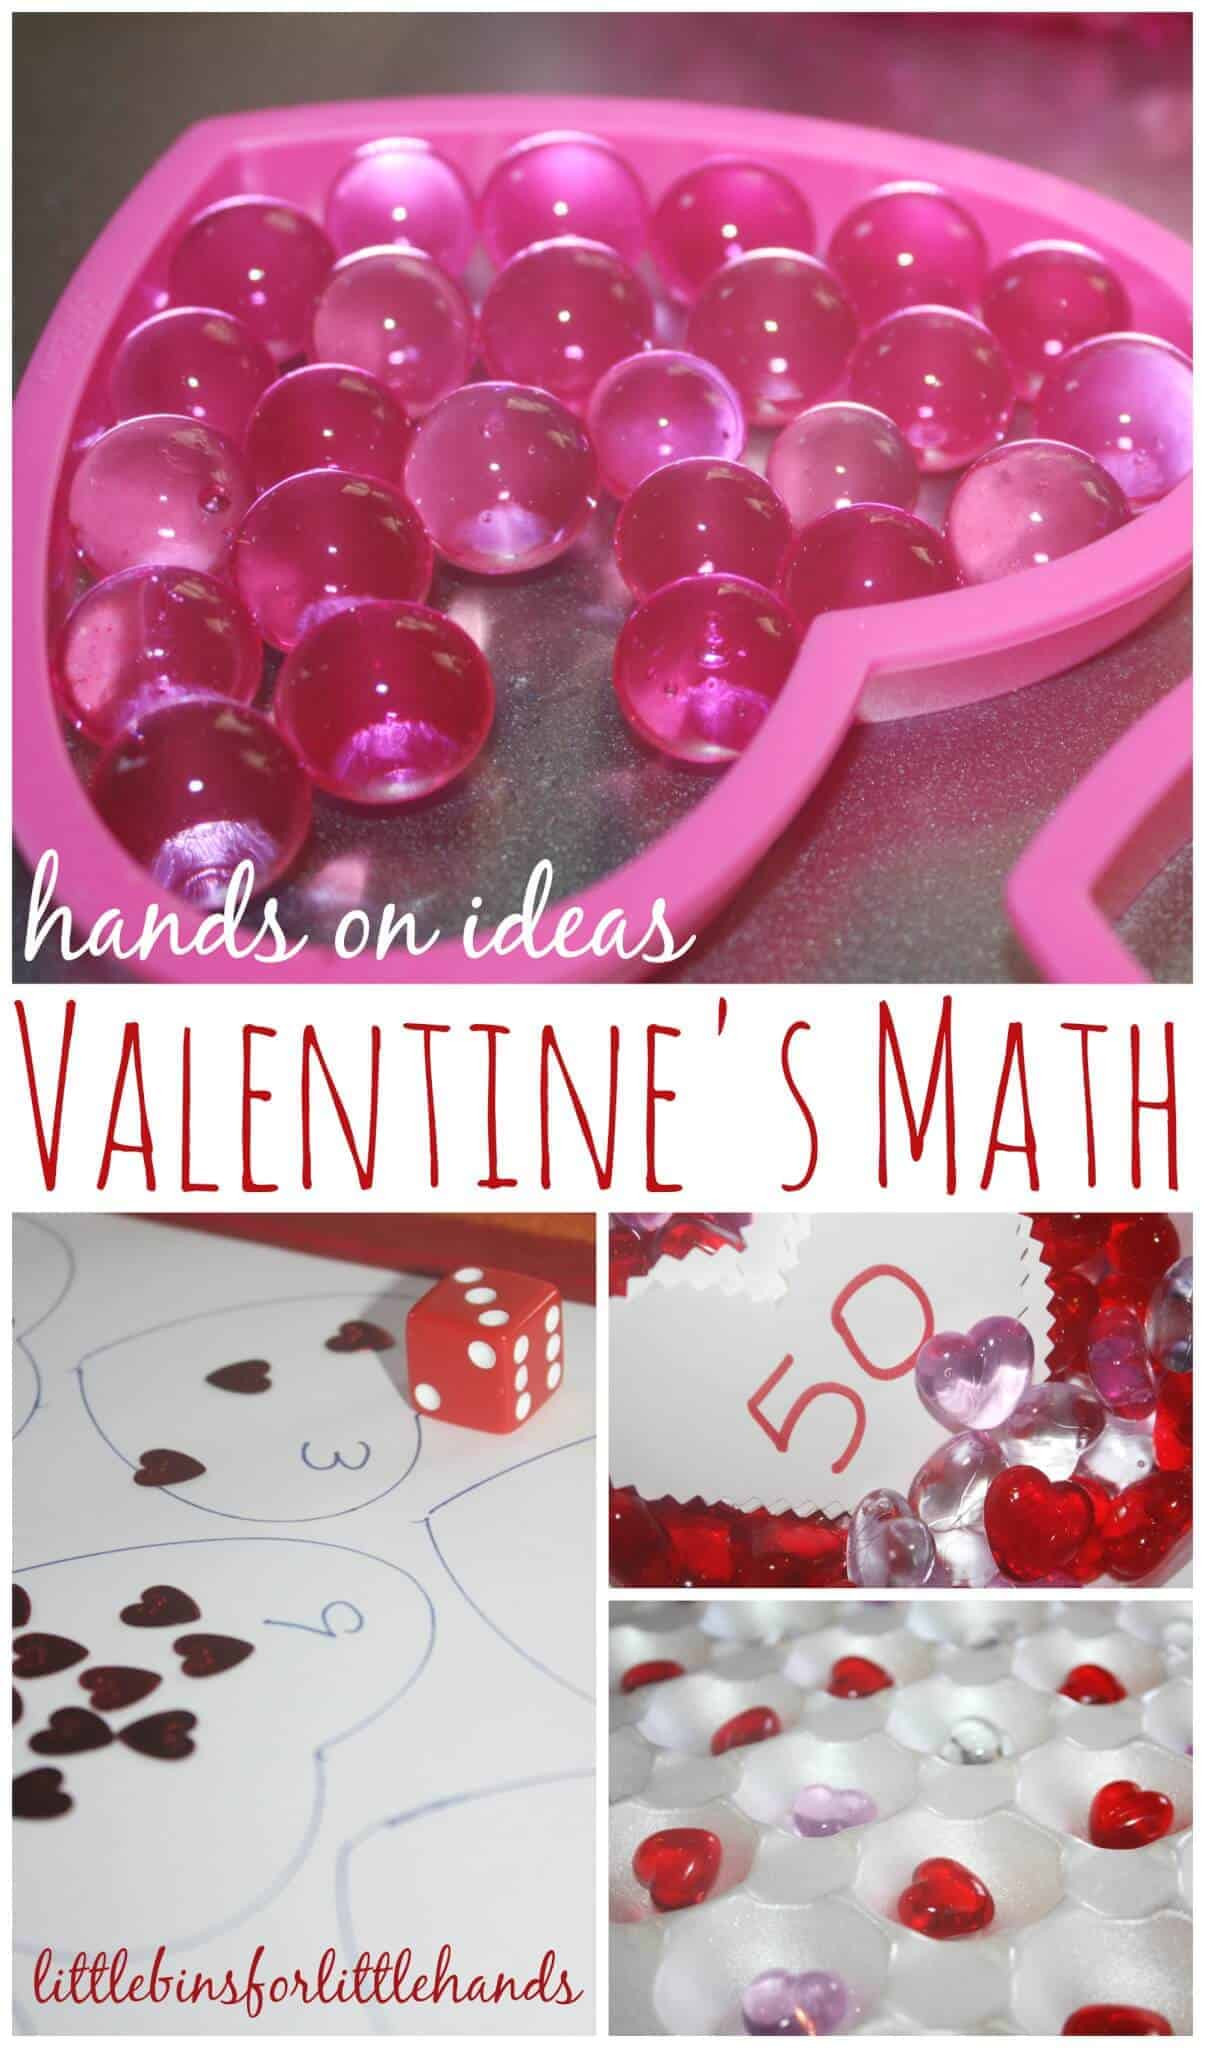 Valentine Gift Ideas For Kindergarten
 Valentines Preschool Activities for Early Learning